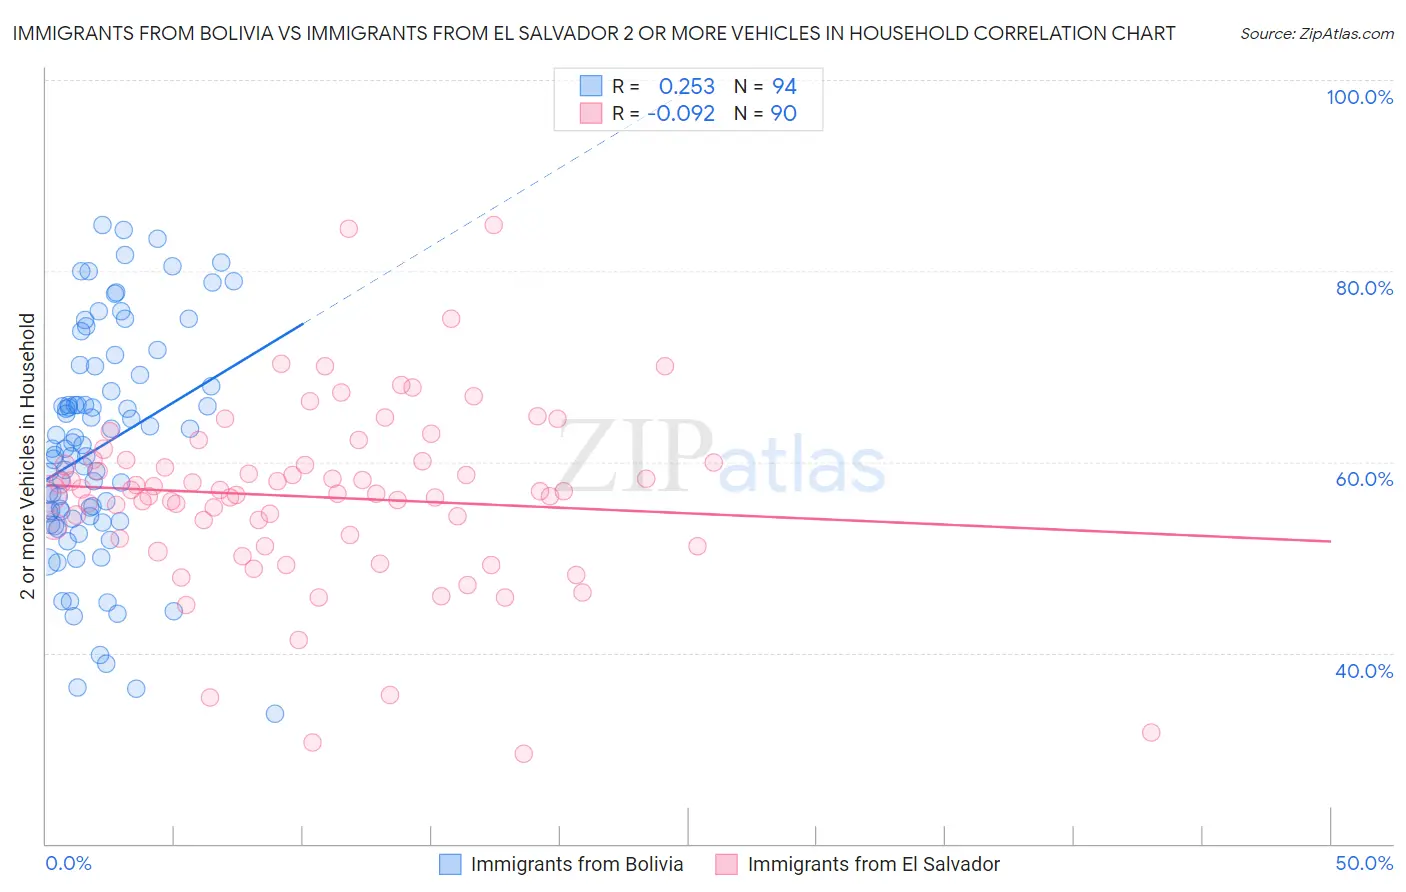 Immigrants from Bolivia vs Immigrants from El Salvador 2 or more Vehicles in Household